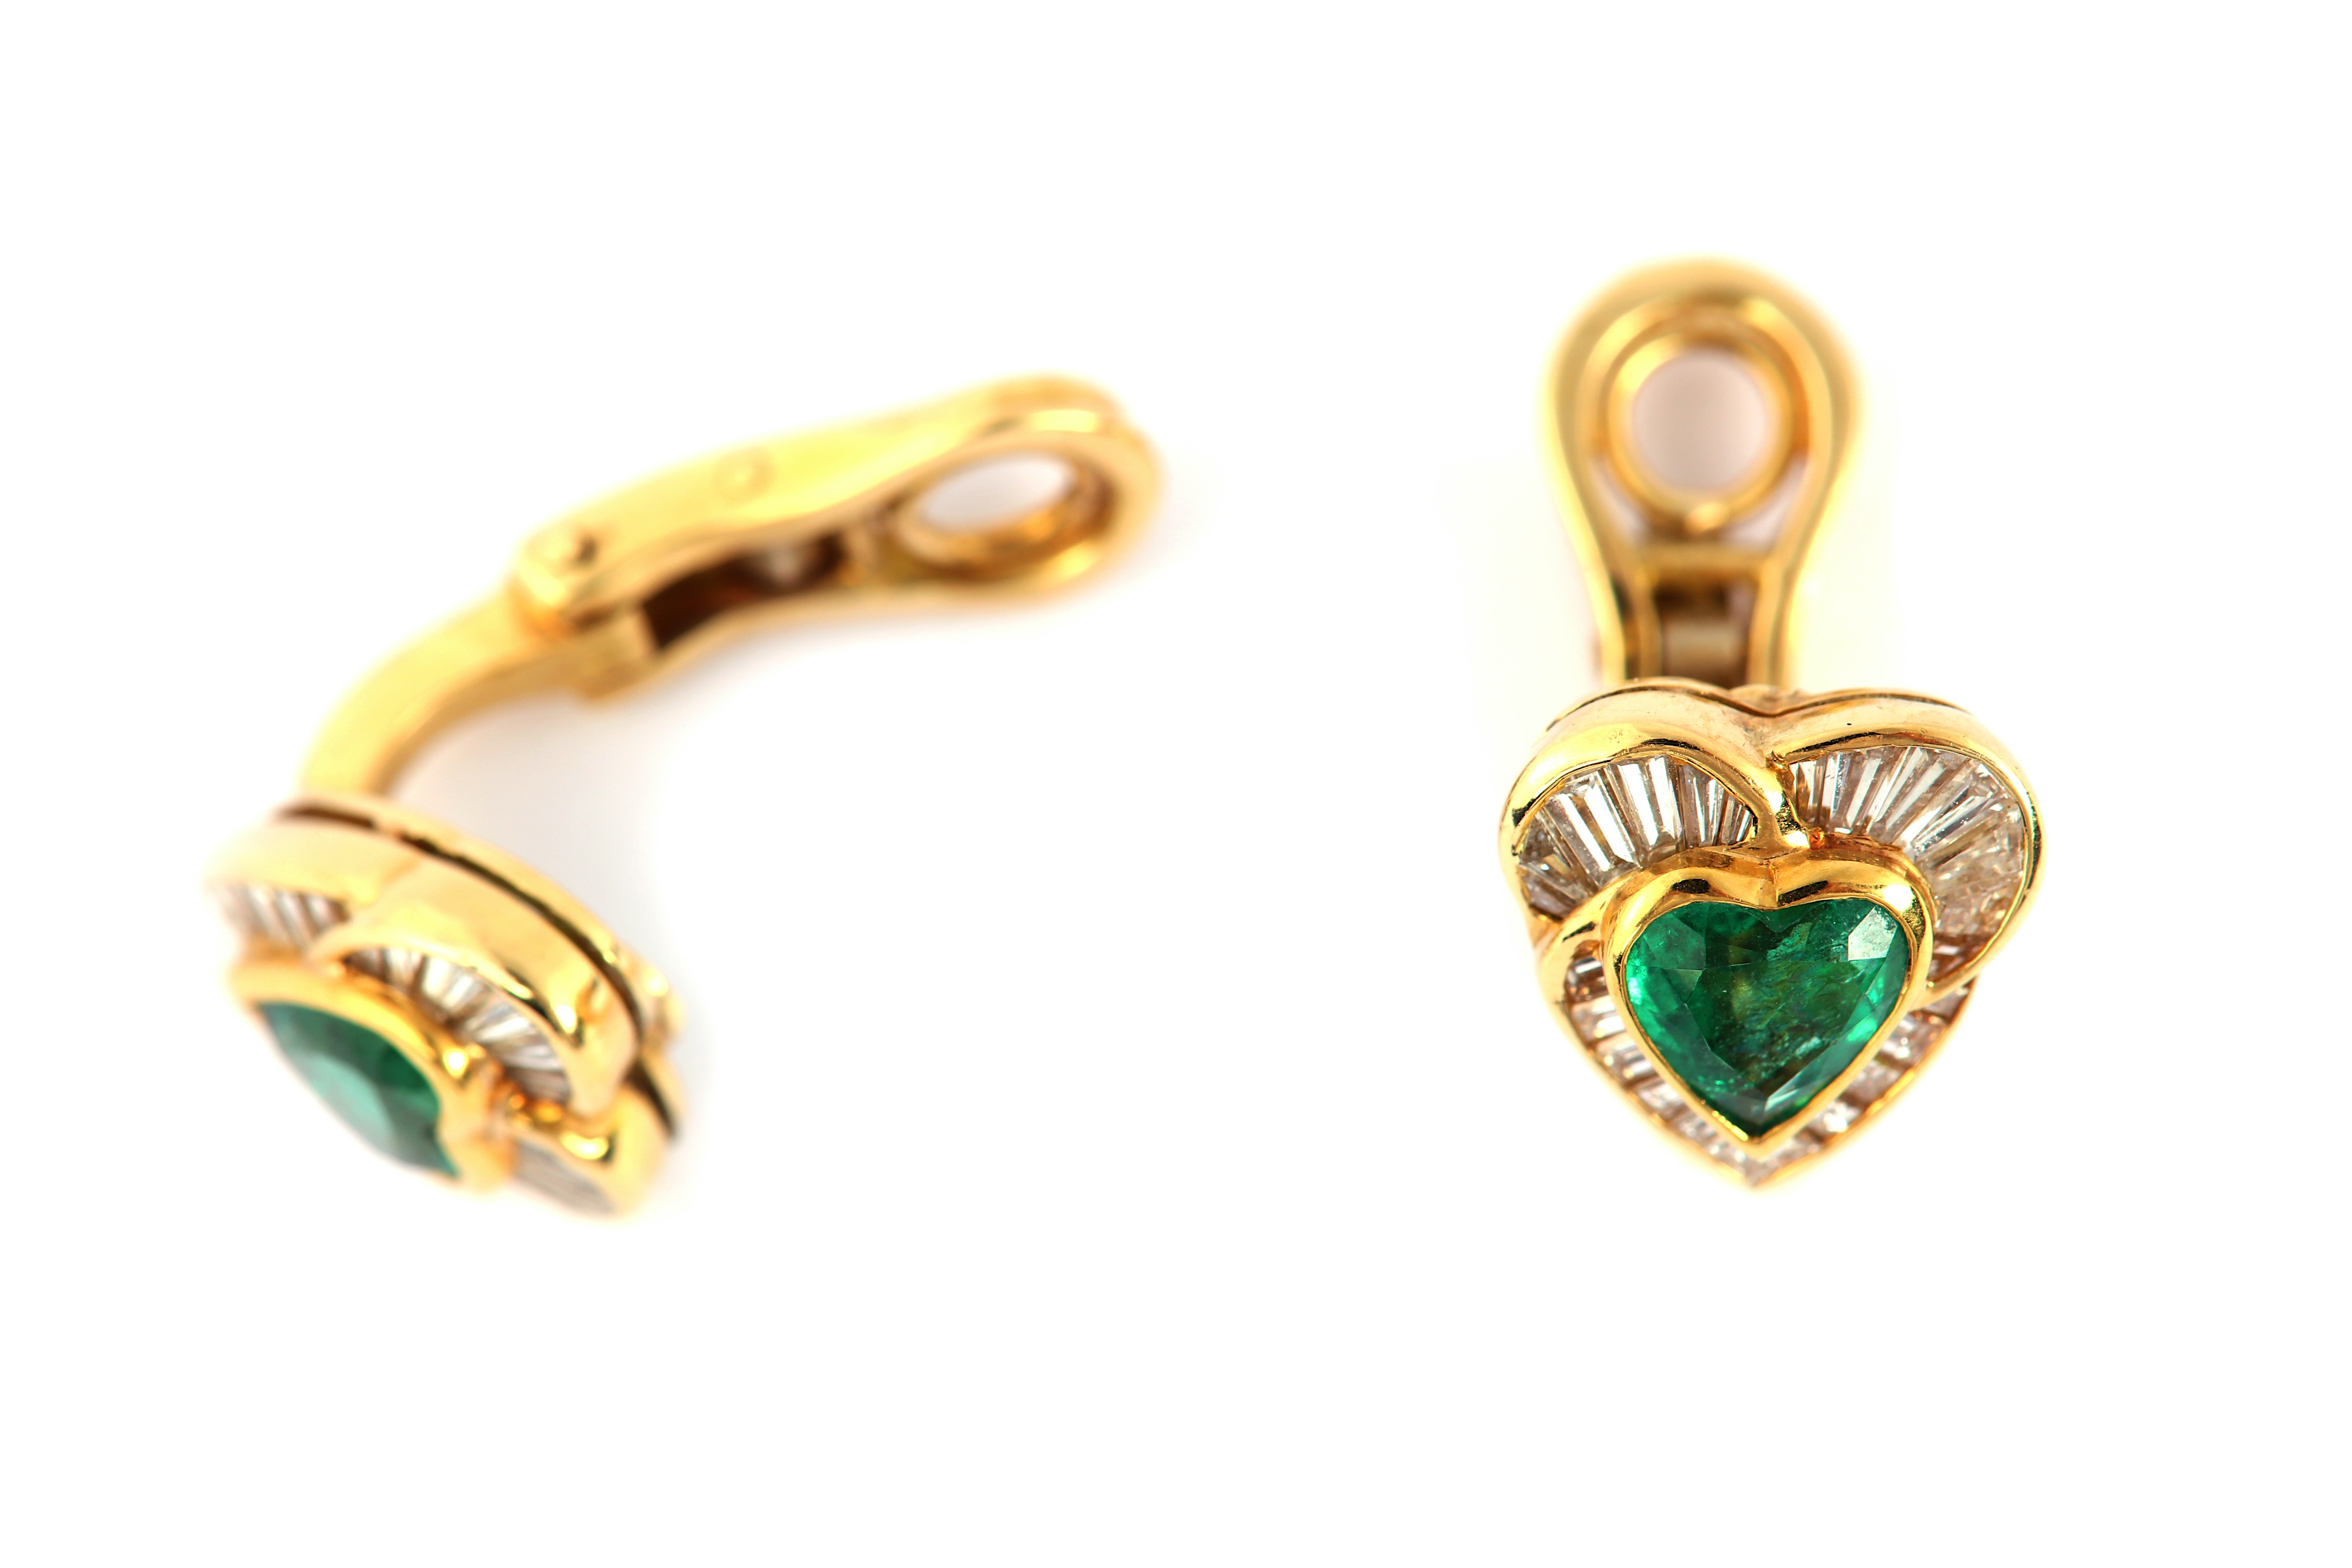 A pair of emerald and diamond earclips, by H. Stern - Image 3 of 5